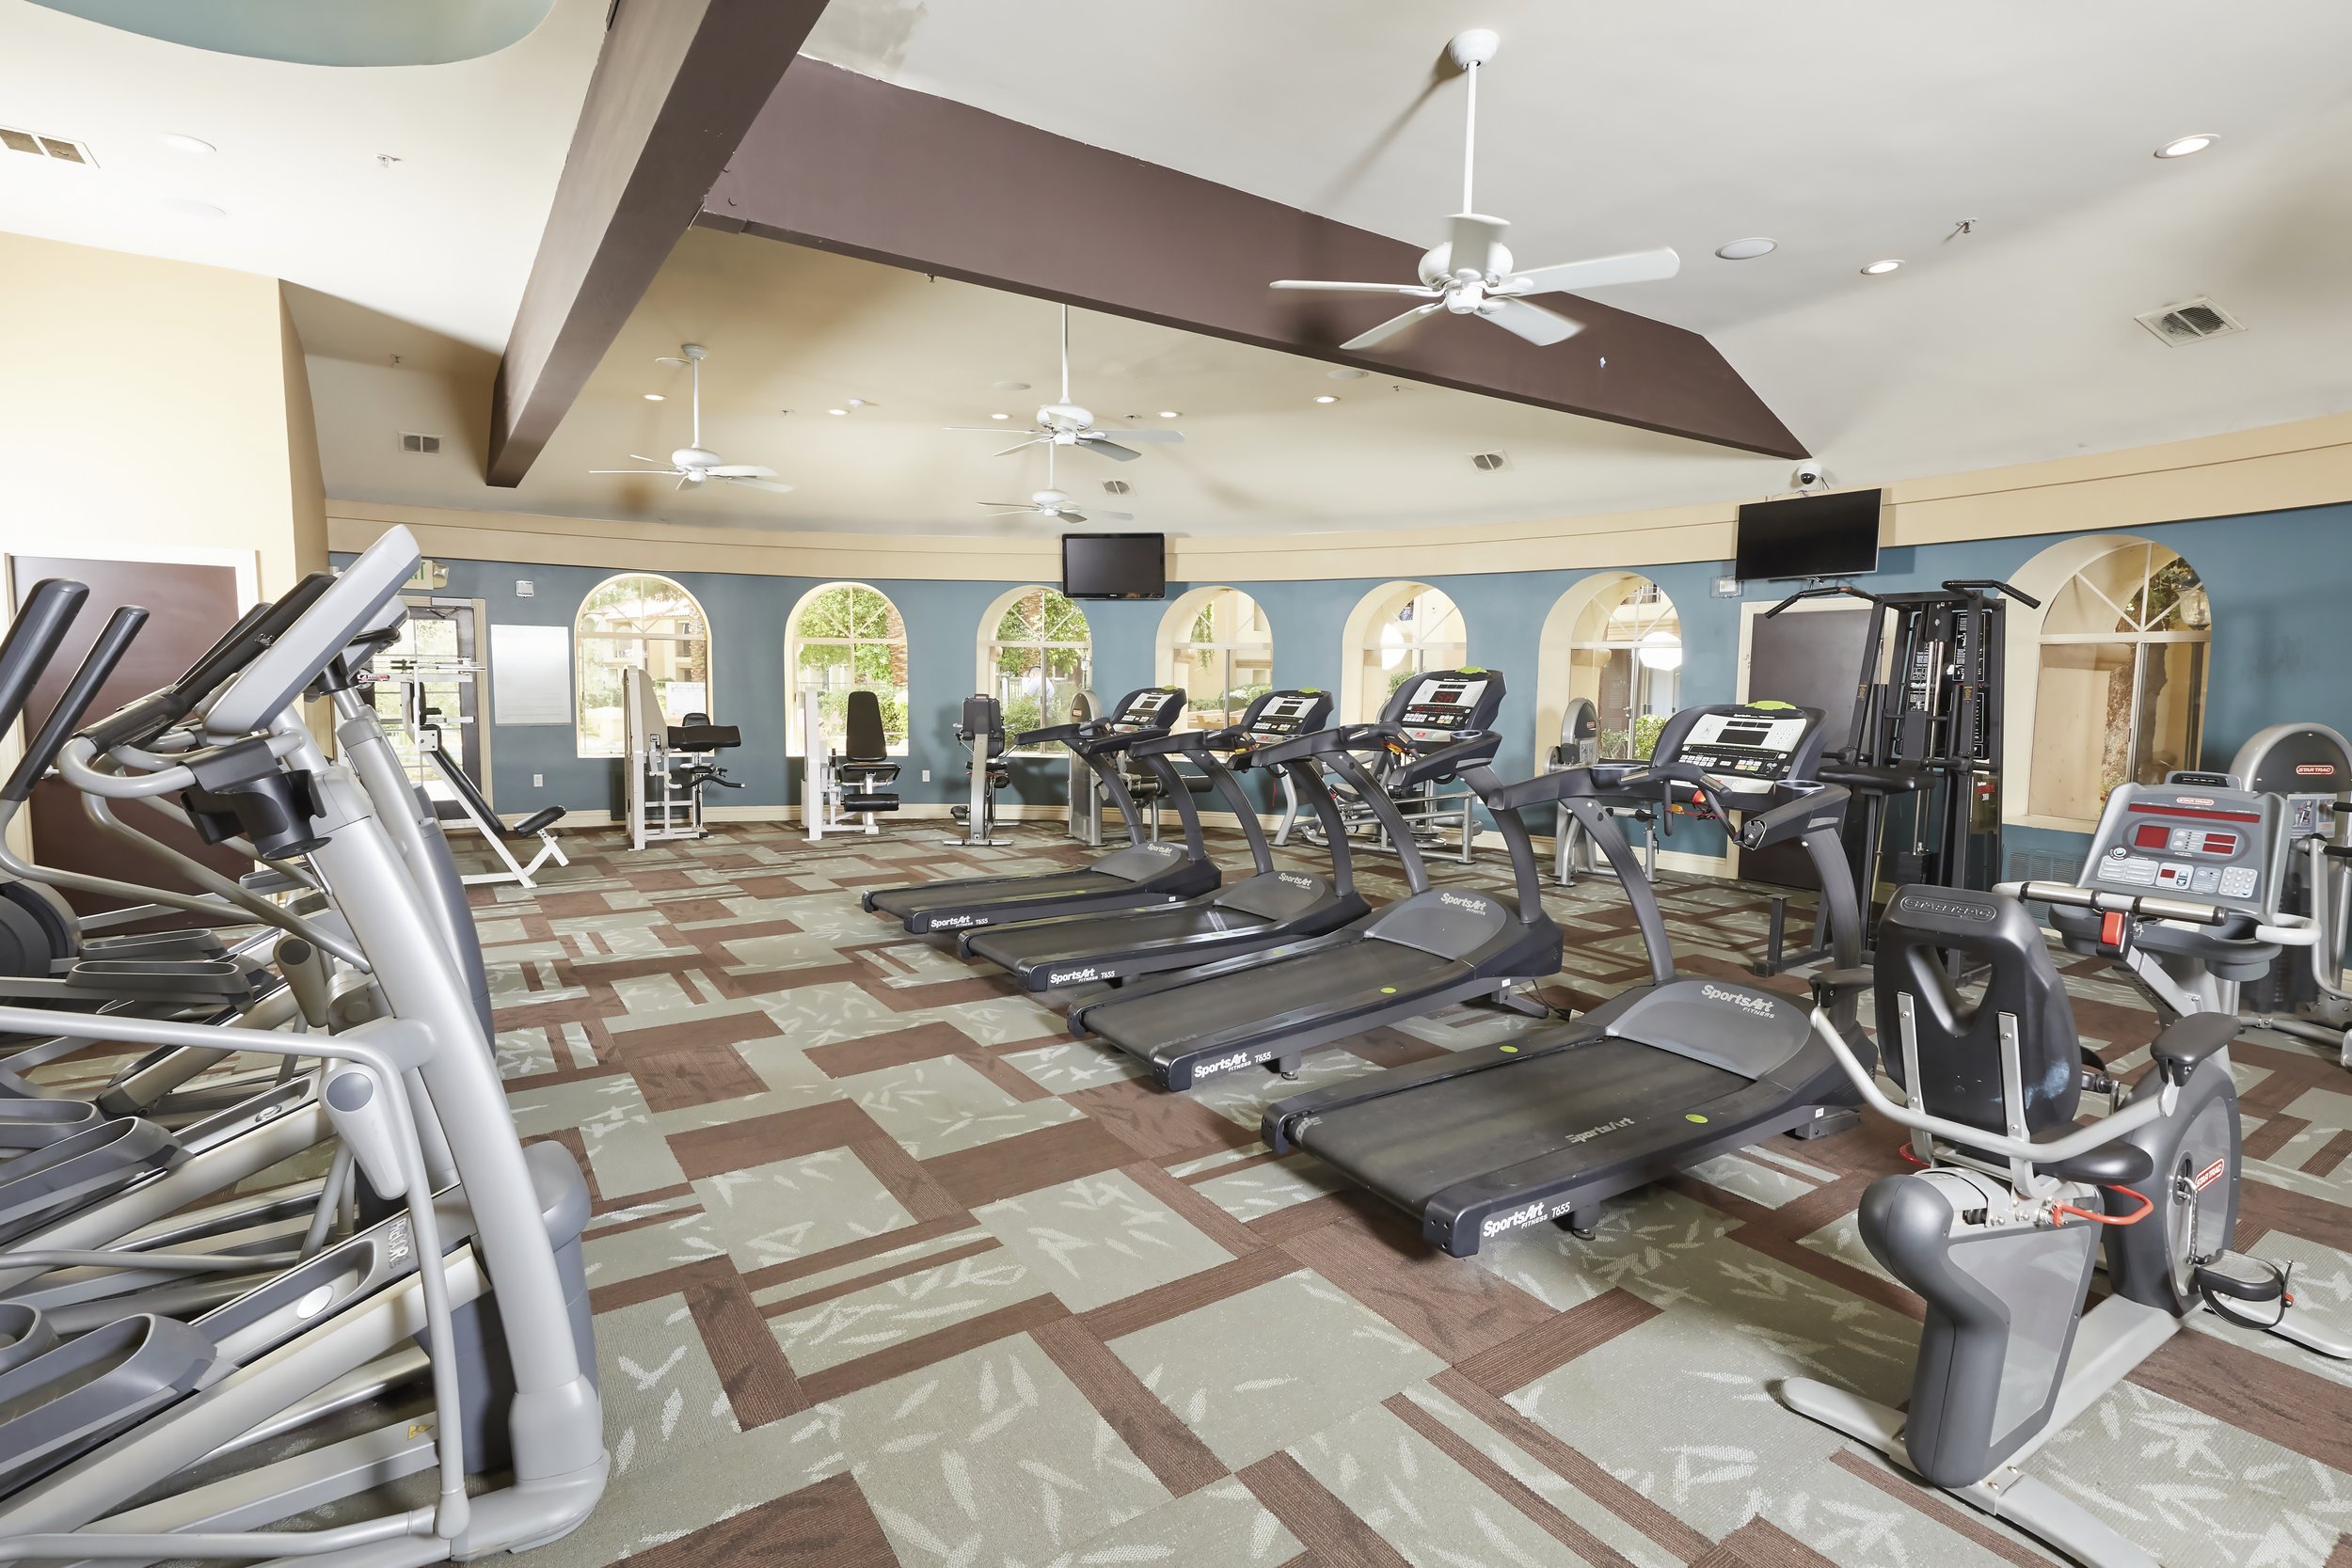  Huge fitness center with many different equipment to make it a positive work out experience  